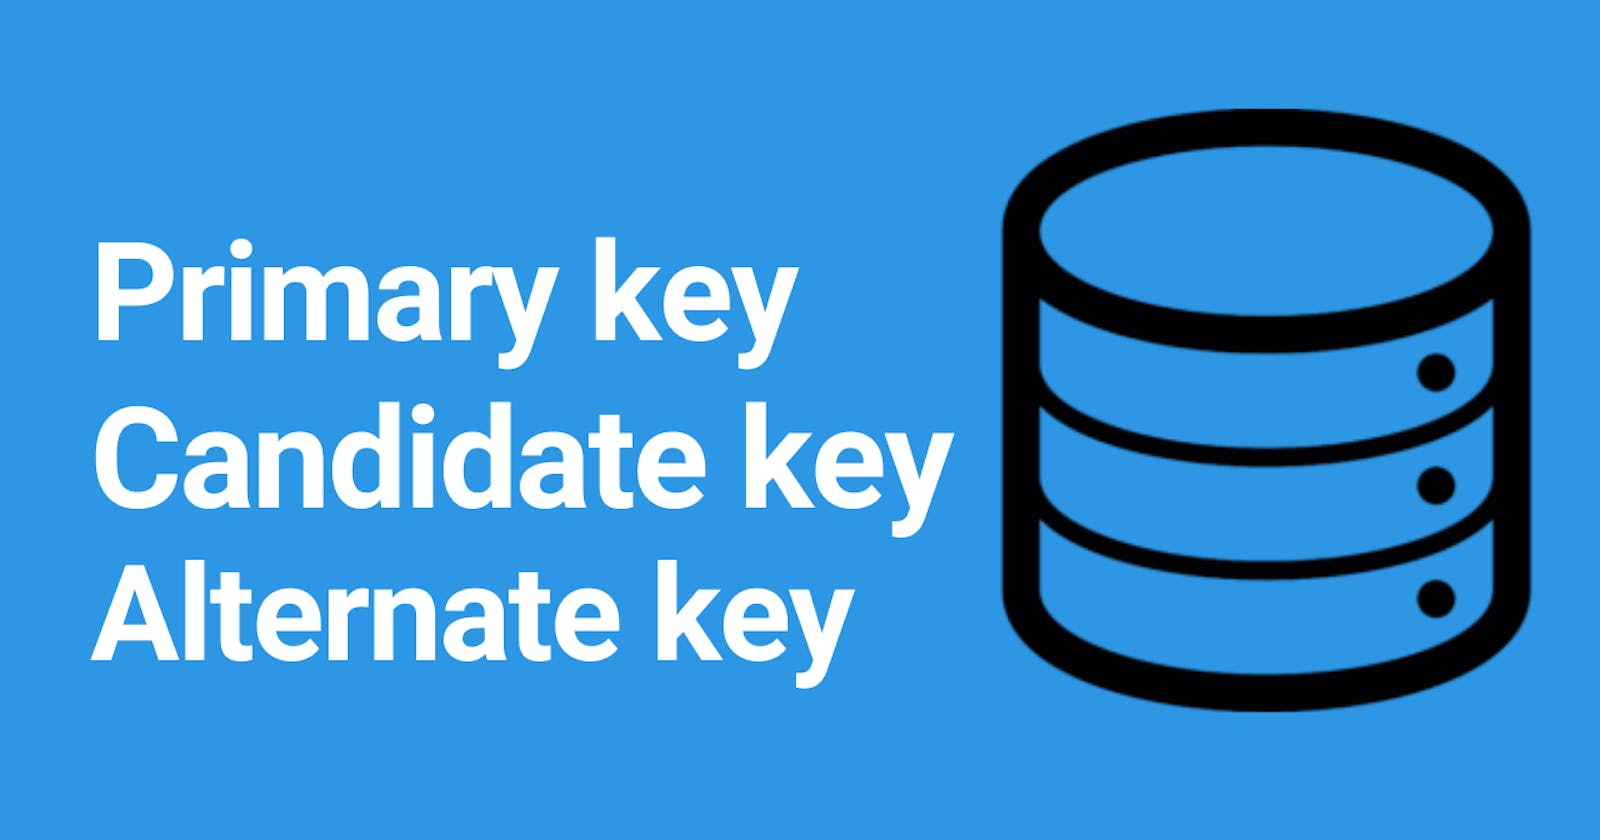 Primary, Candidate and Alternate key